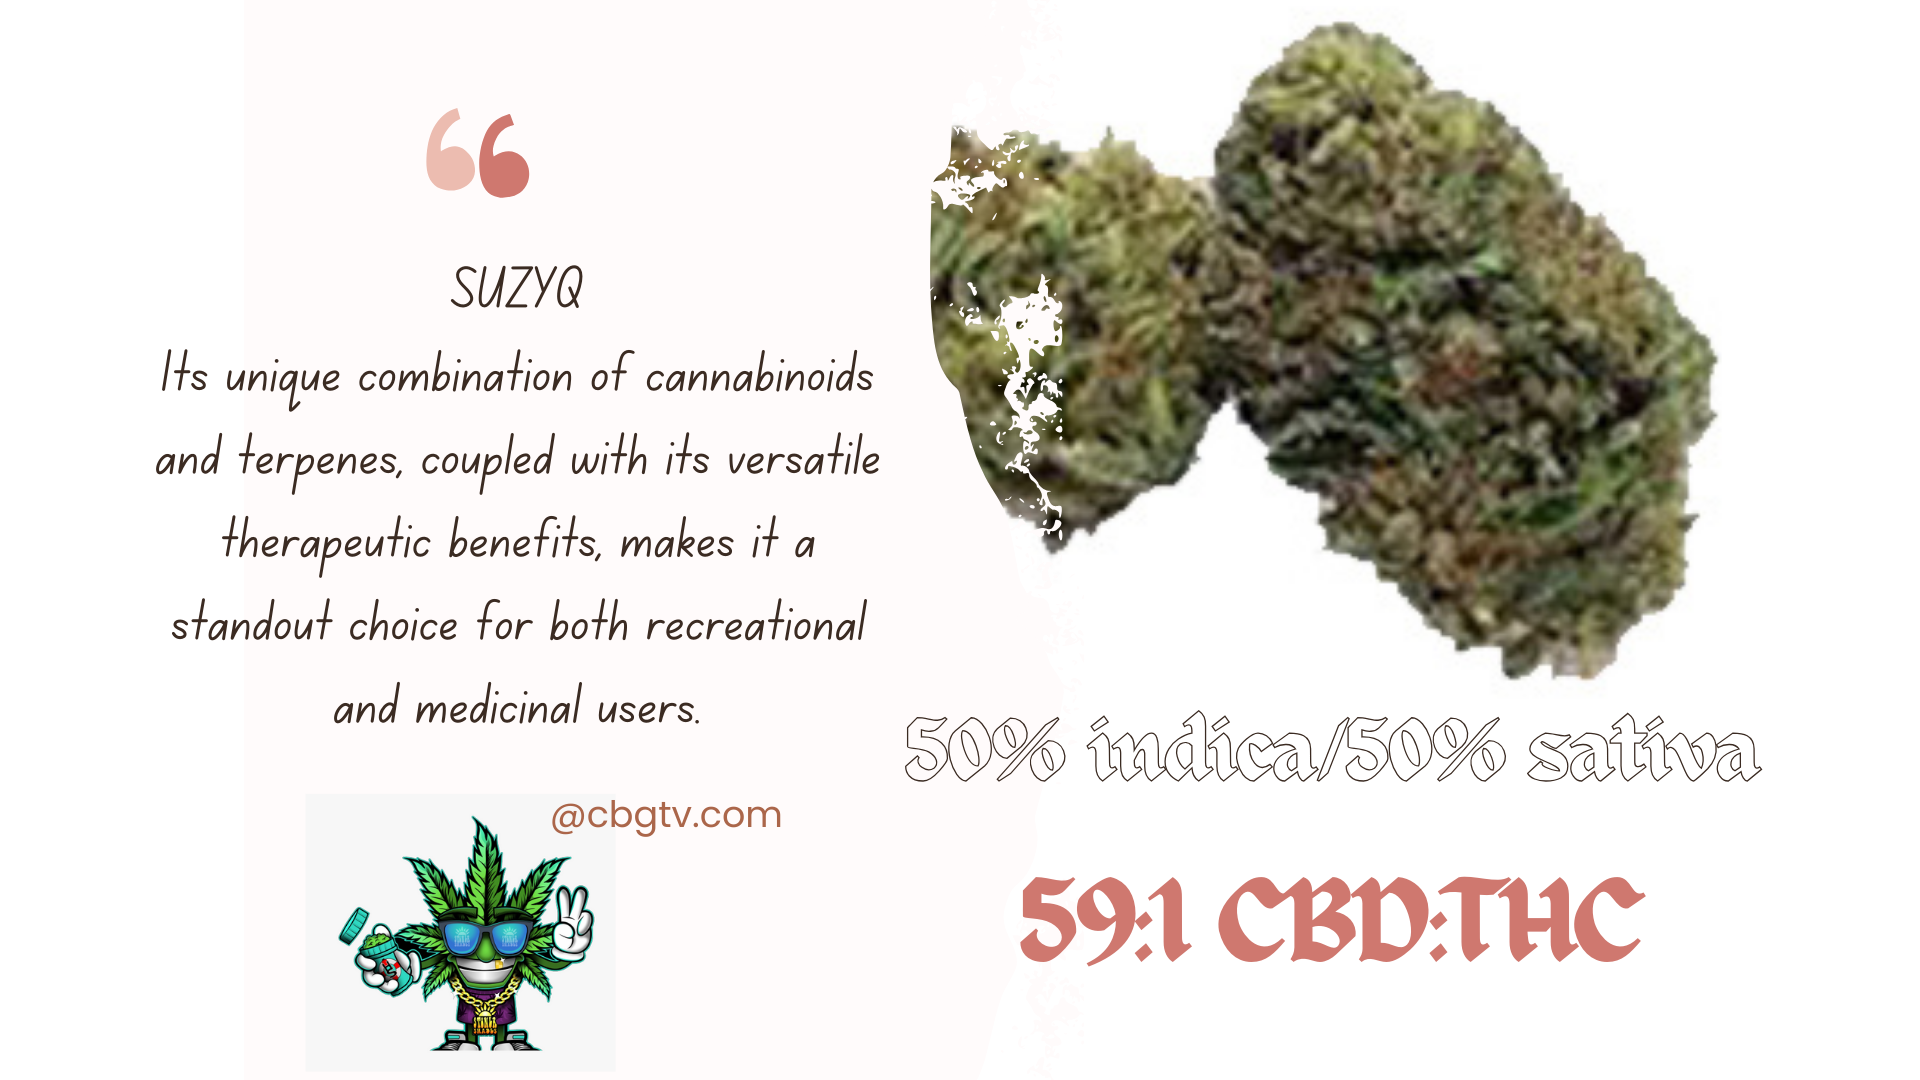 For those eager to explore more strains and expand their cannabis knowledge, I highly recommend subscribing to CBGTV.COM. Their platform offers a wealth of strain reviews, expert insights, and engaging infotainment that will enrich your cannabis experience. Stay informed, discover new favorites, and embark on a journey of cannabis exploration by subscribing to CBGTV.COM today. Your next extraordinary cannabis experience awaits!